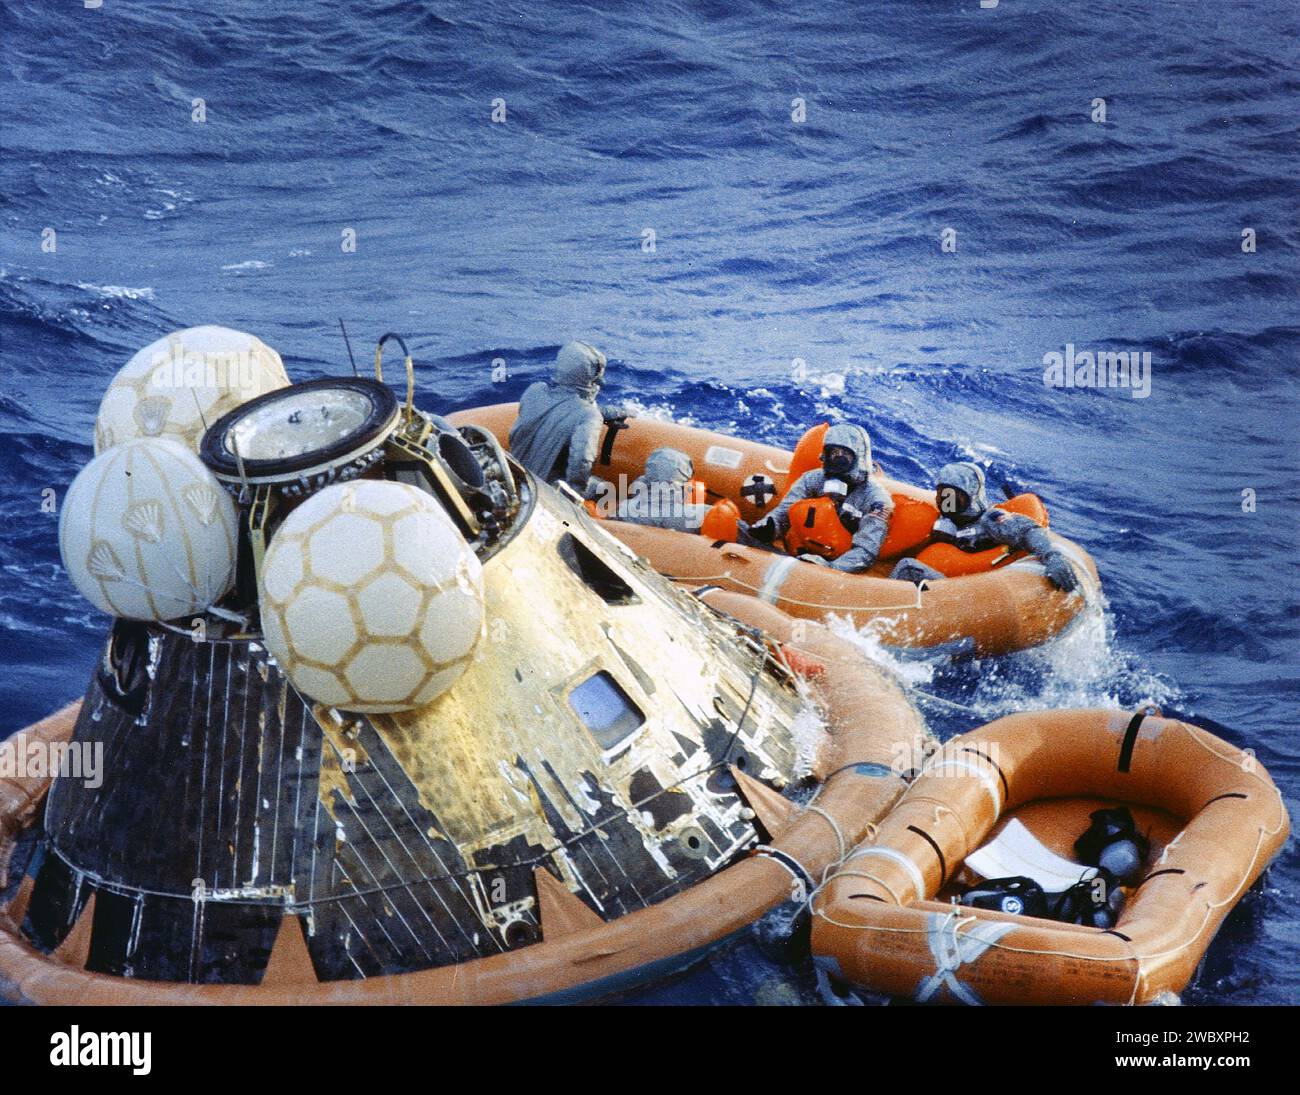 American Astronauts Edwin E. Aldrin, Neil A. Armstrong and Michael Collins in decontamination  raft during recovery operation of Command Module Columbia  after successful Apollo 11 mission, the first manned lunar mission, Pacific Ocean, NASA, July 24, 1969 Stock Photo